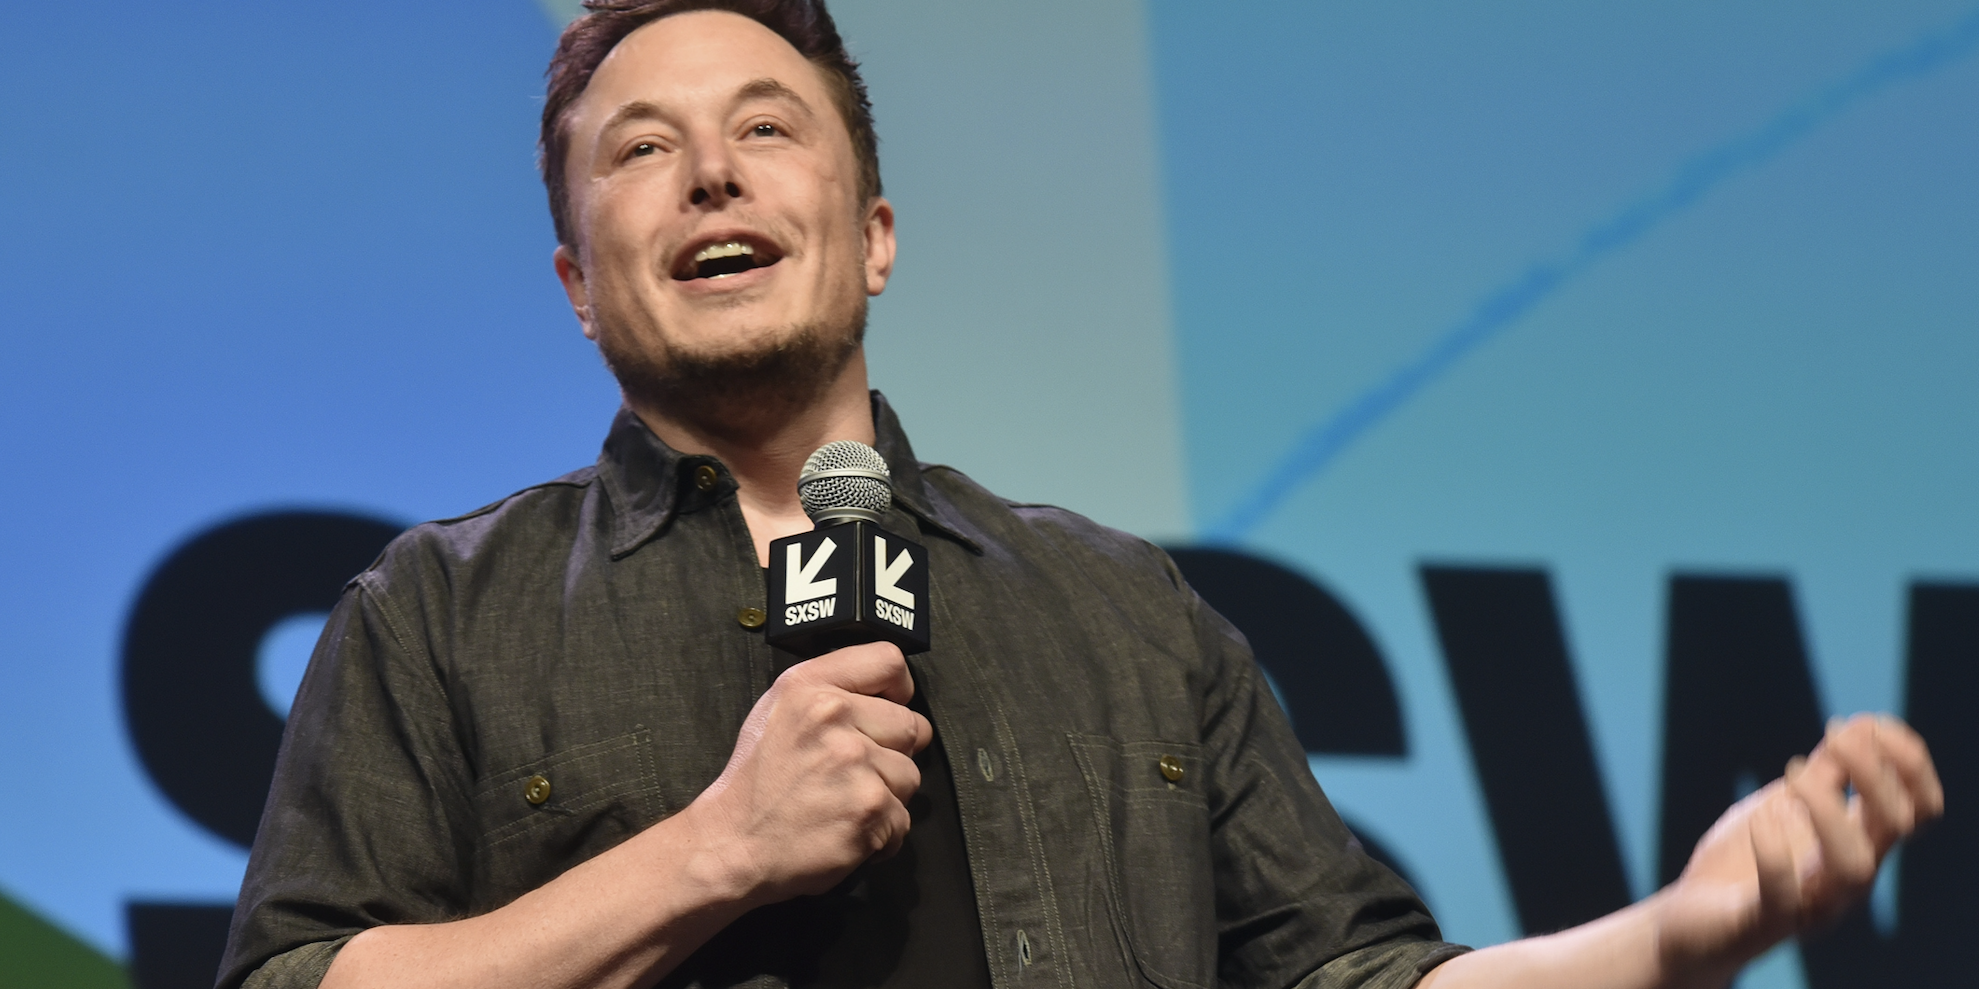 Elon Musk says it’s now ‘impossible’ to take Tesla private – and that a Starlink IPO is likely